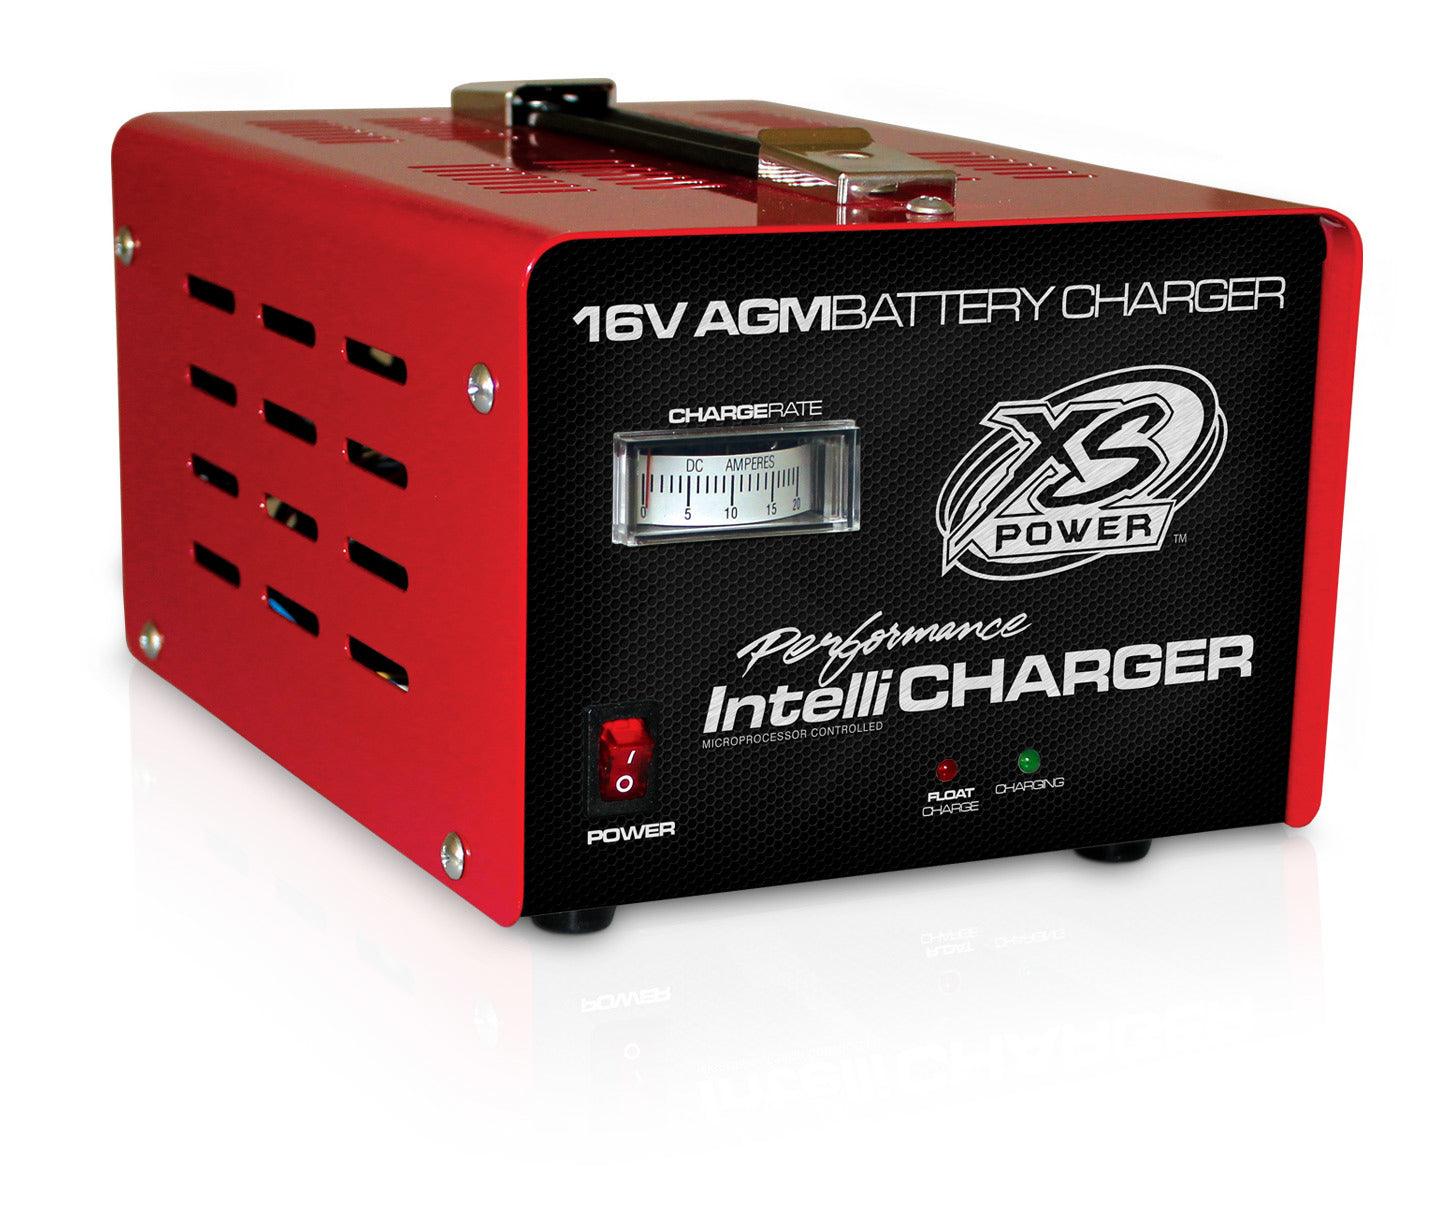 16V XS AGM Battery Charger - Burlile Performance Products